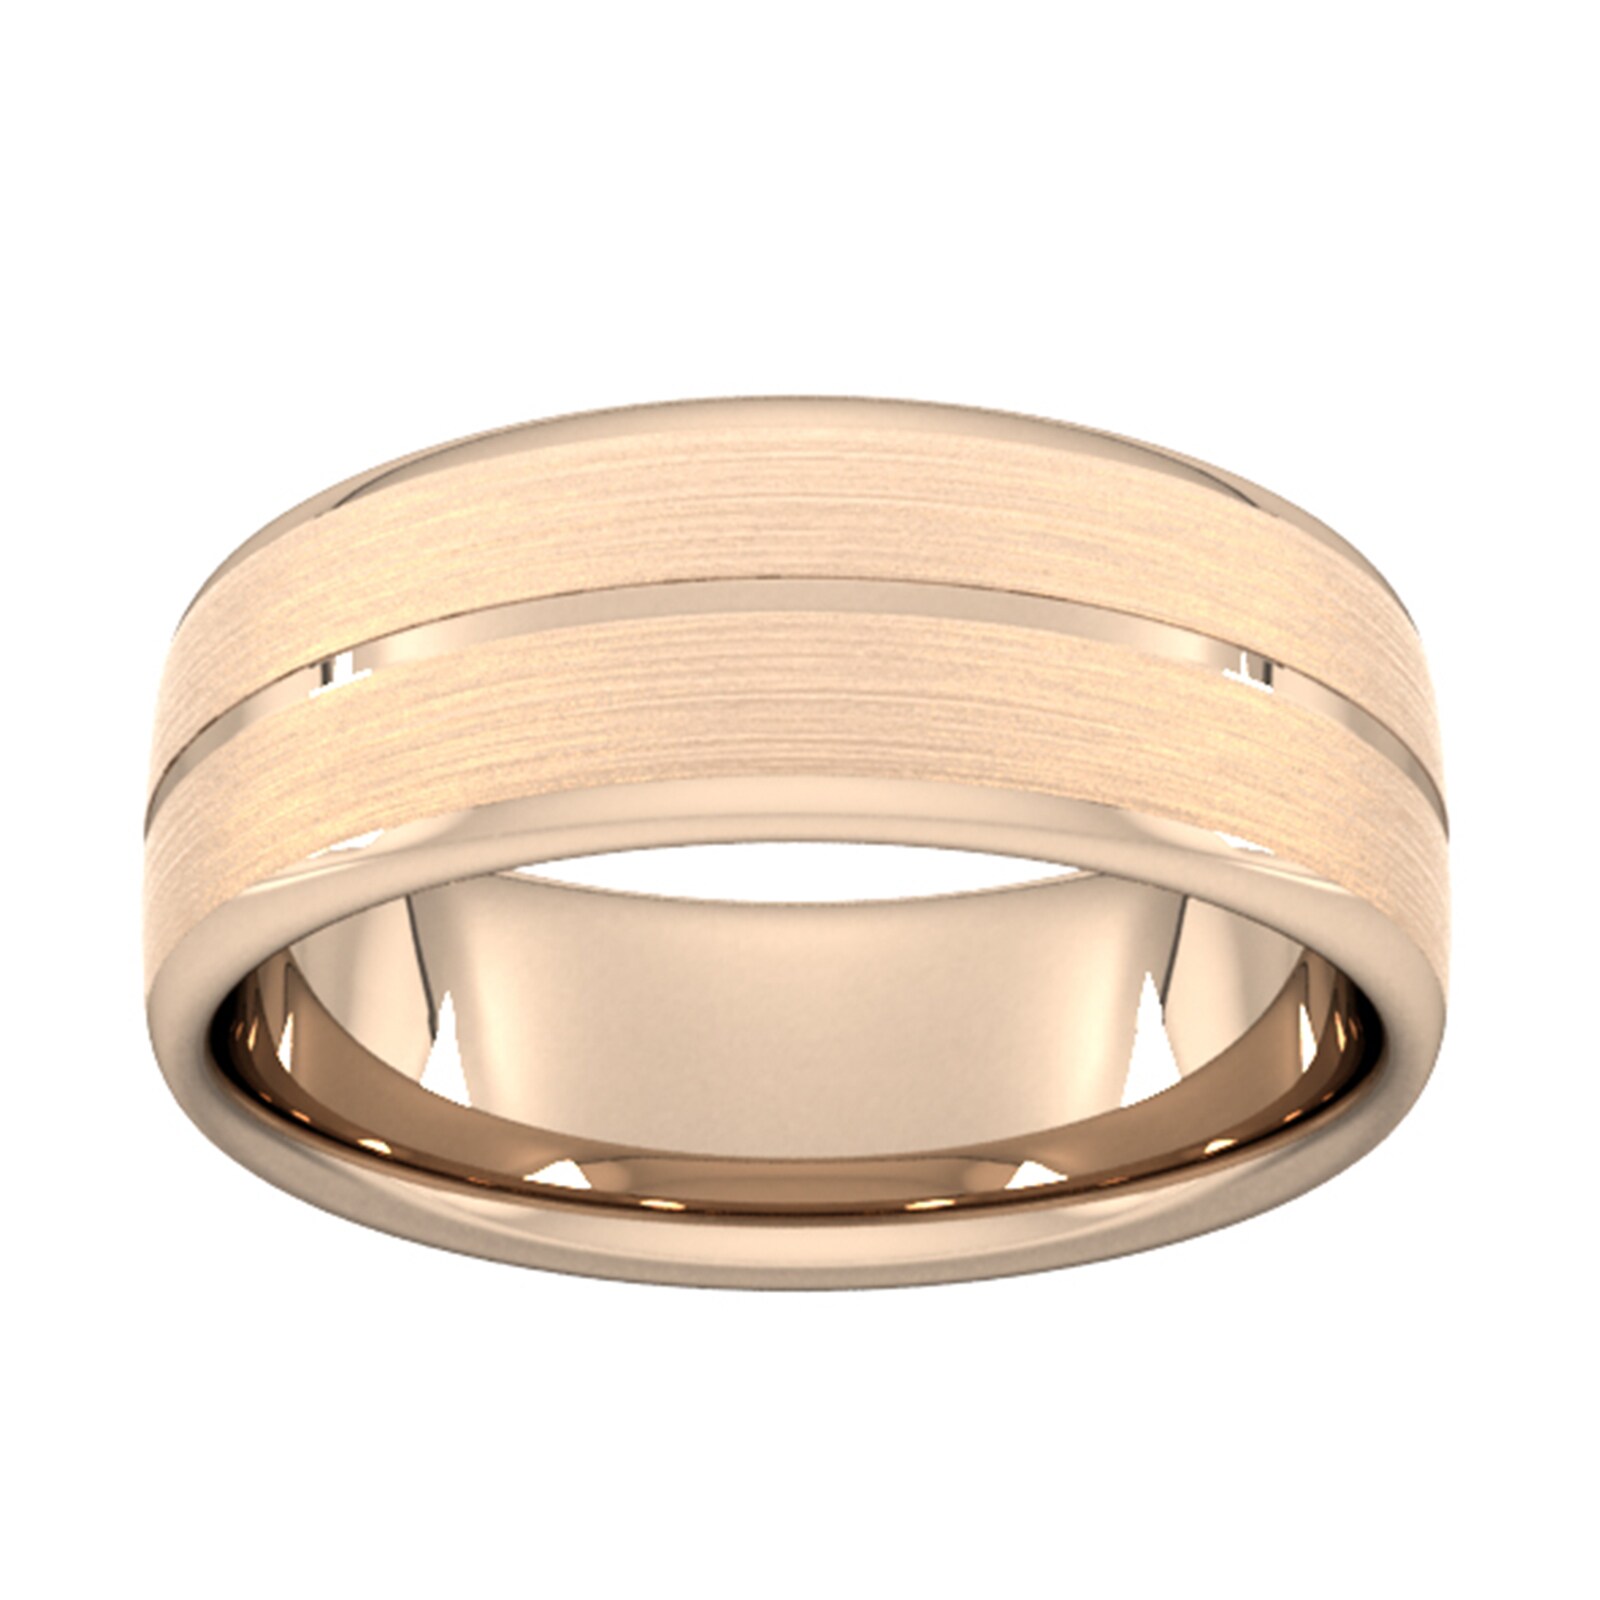 8mm Slight Court Heavy Centre Groove With Chamfered Edge Wedding Ring In 9 Carat Rose Gold - Ring Size M